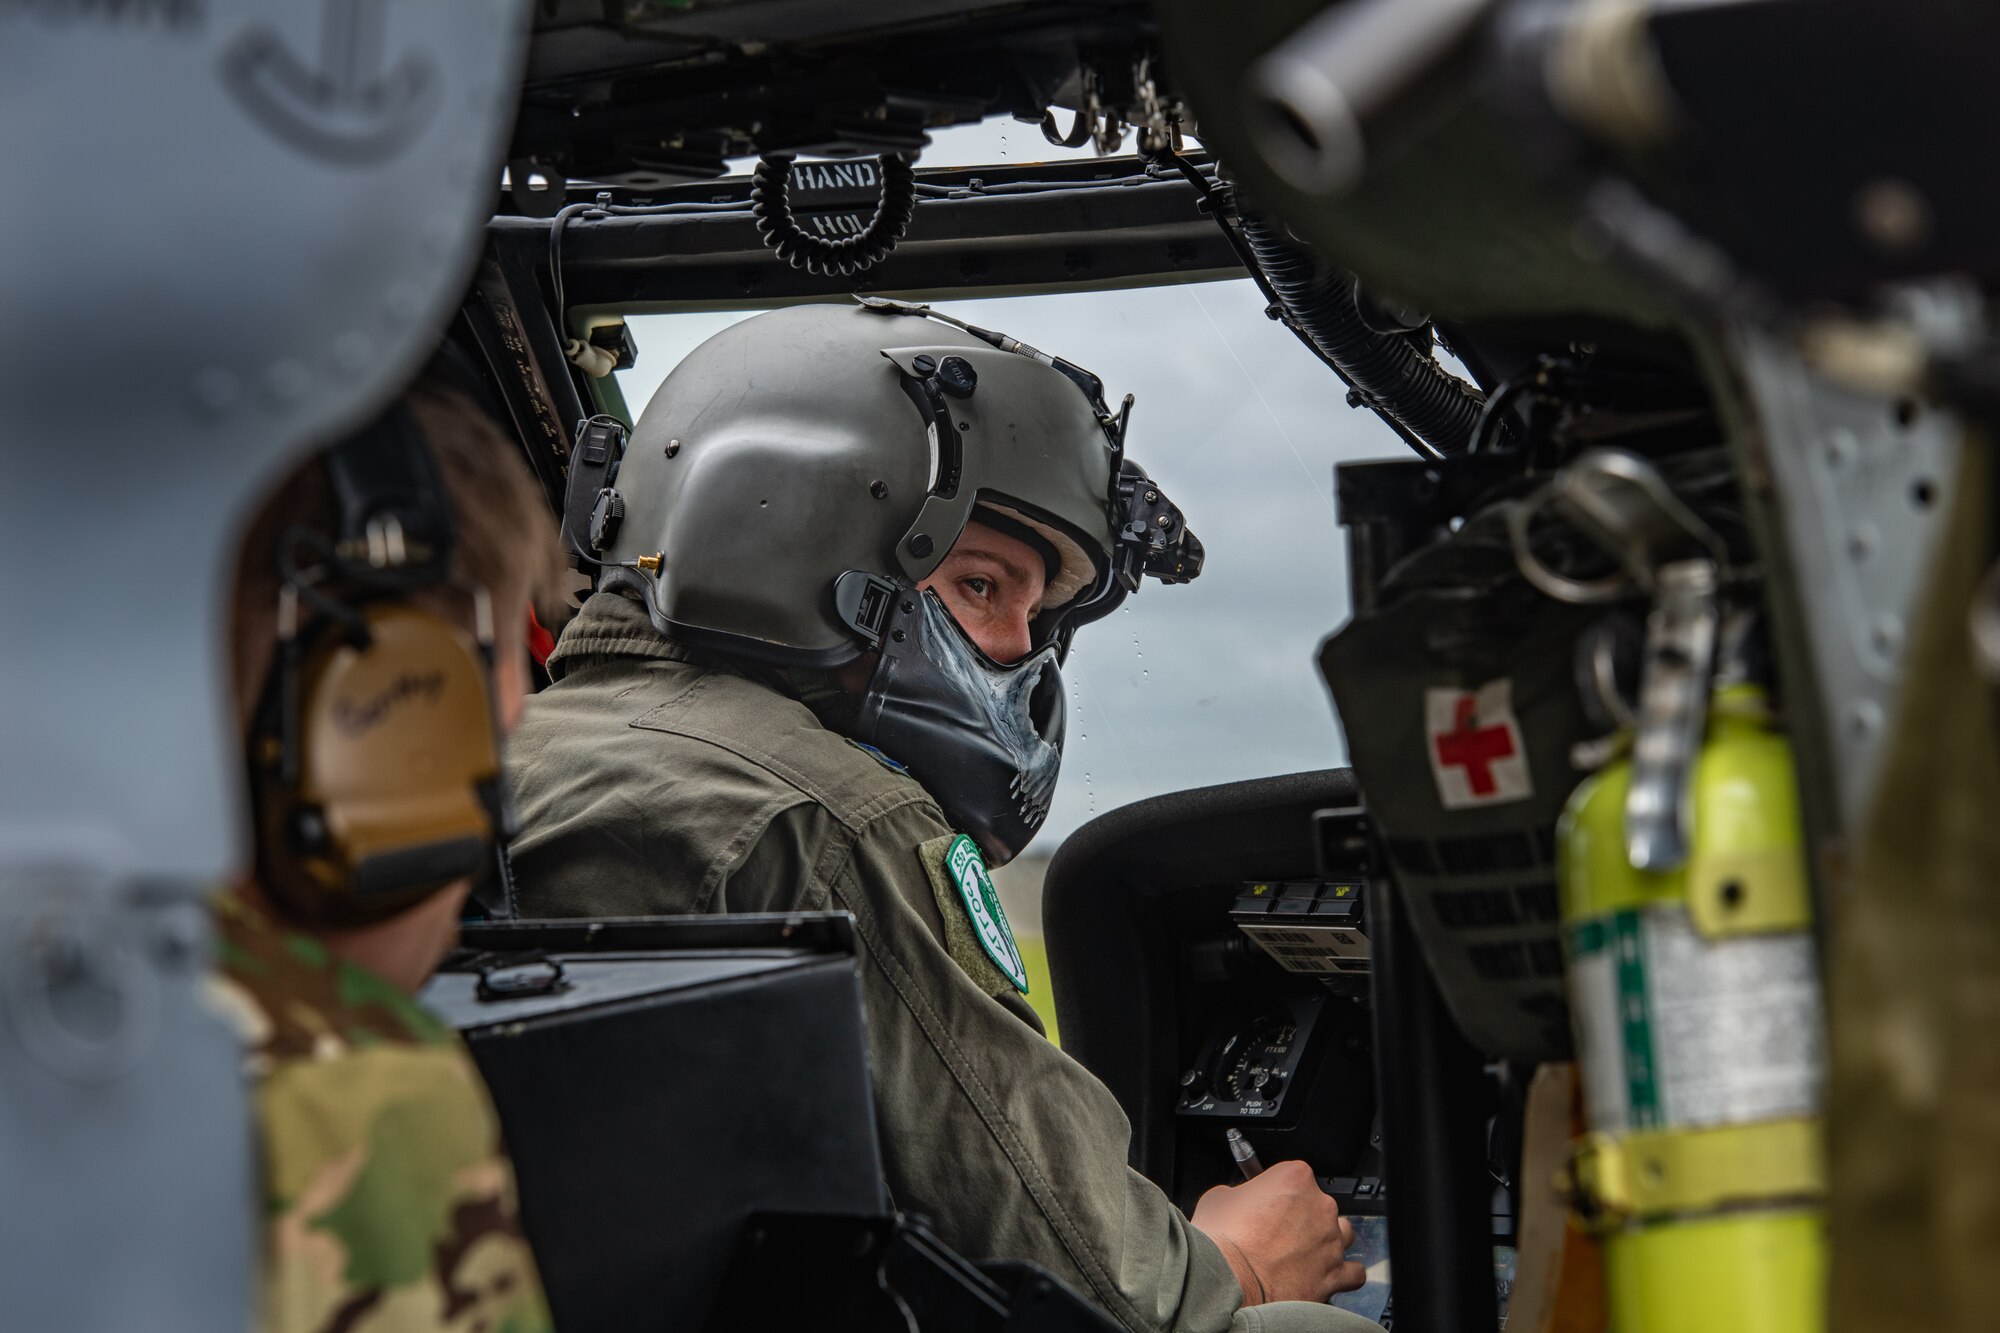 A helicopter pilot looks to his right as he converses with his copilot.